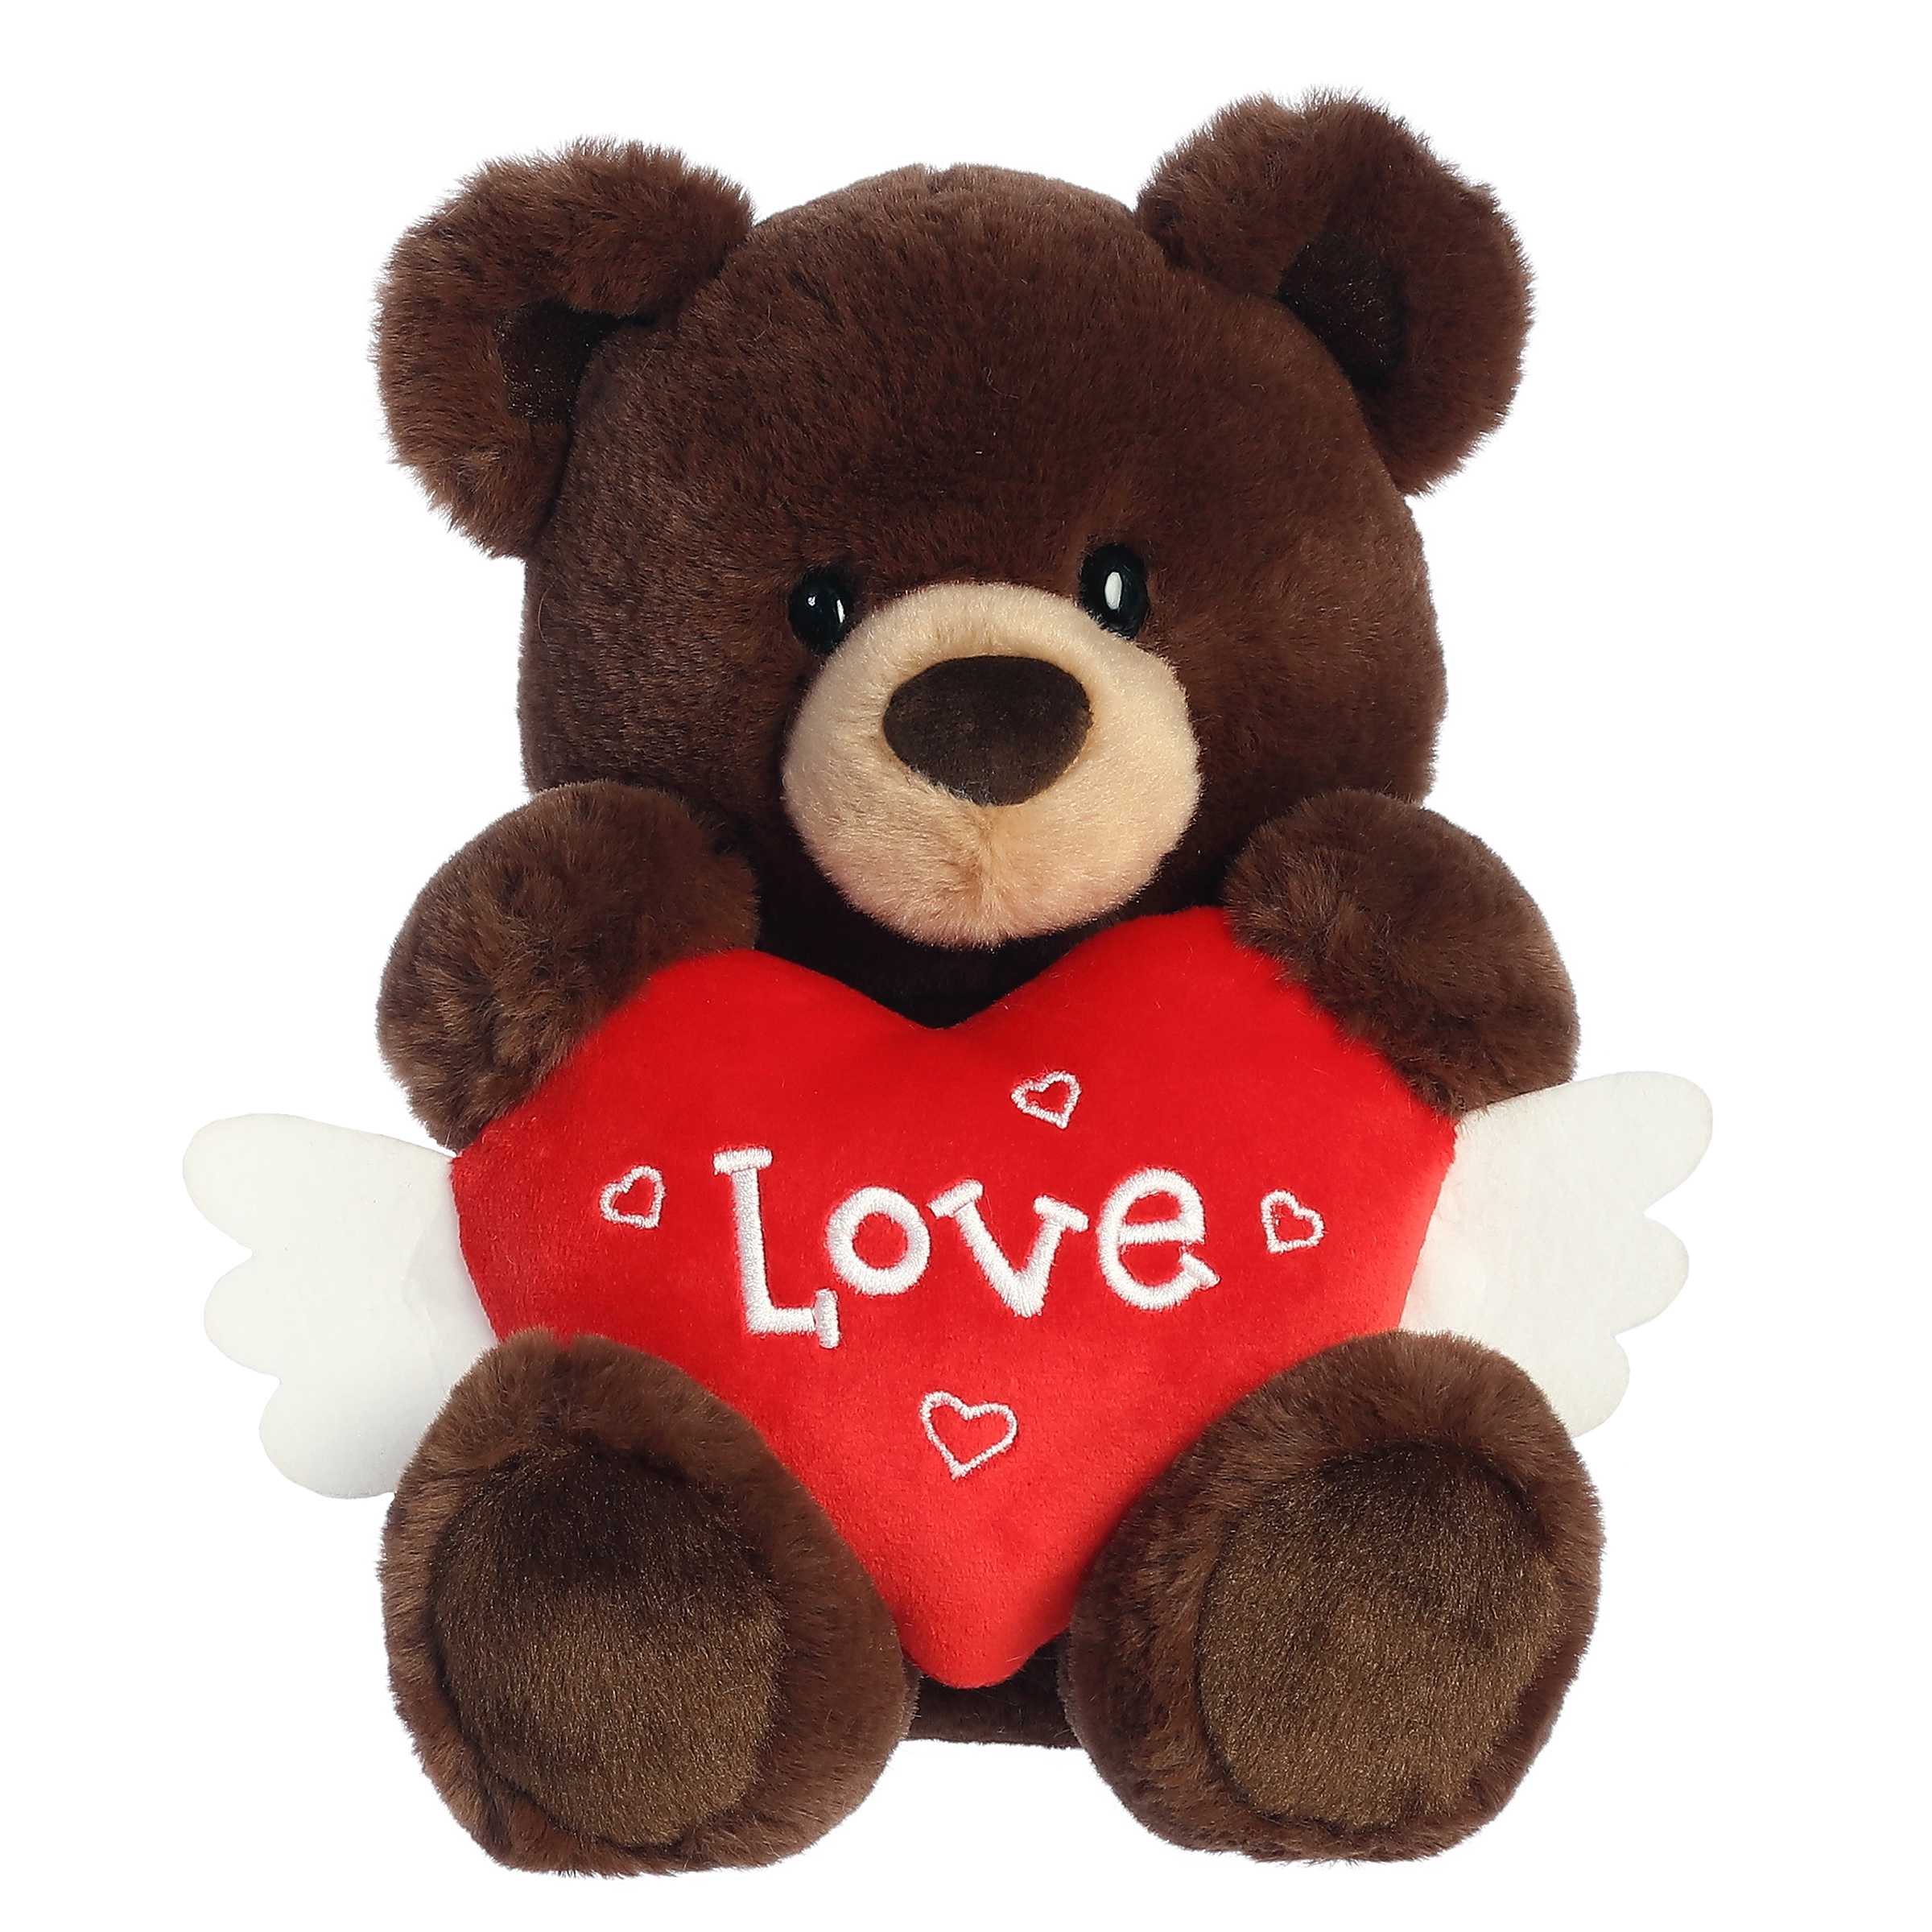 Soft, cream-colored bear plush for Valentine's Day, holding a red heart with white angel wings, embroidered with 'Love'.